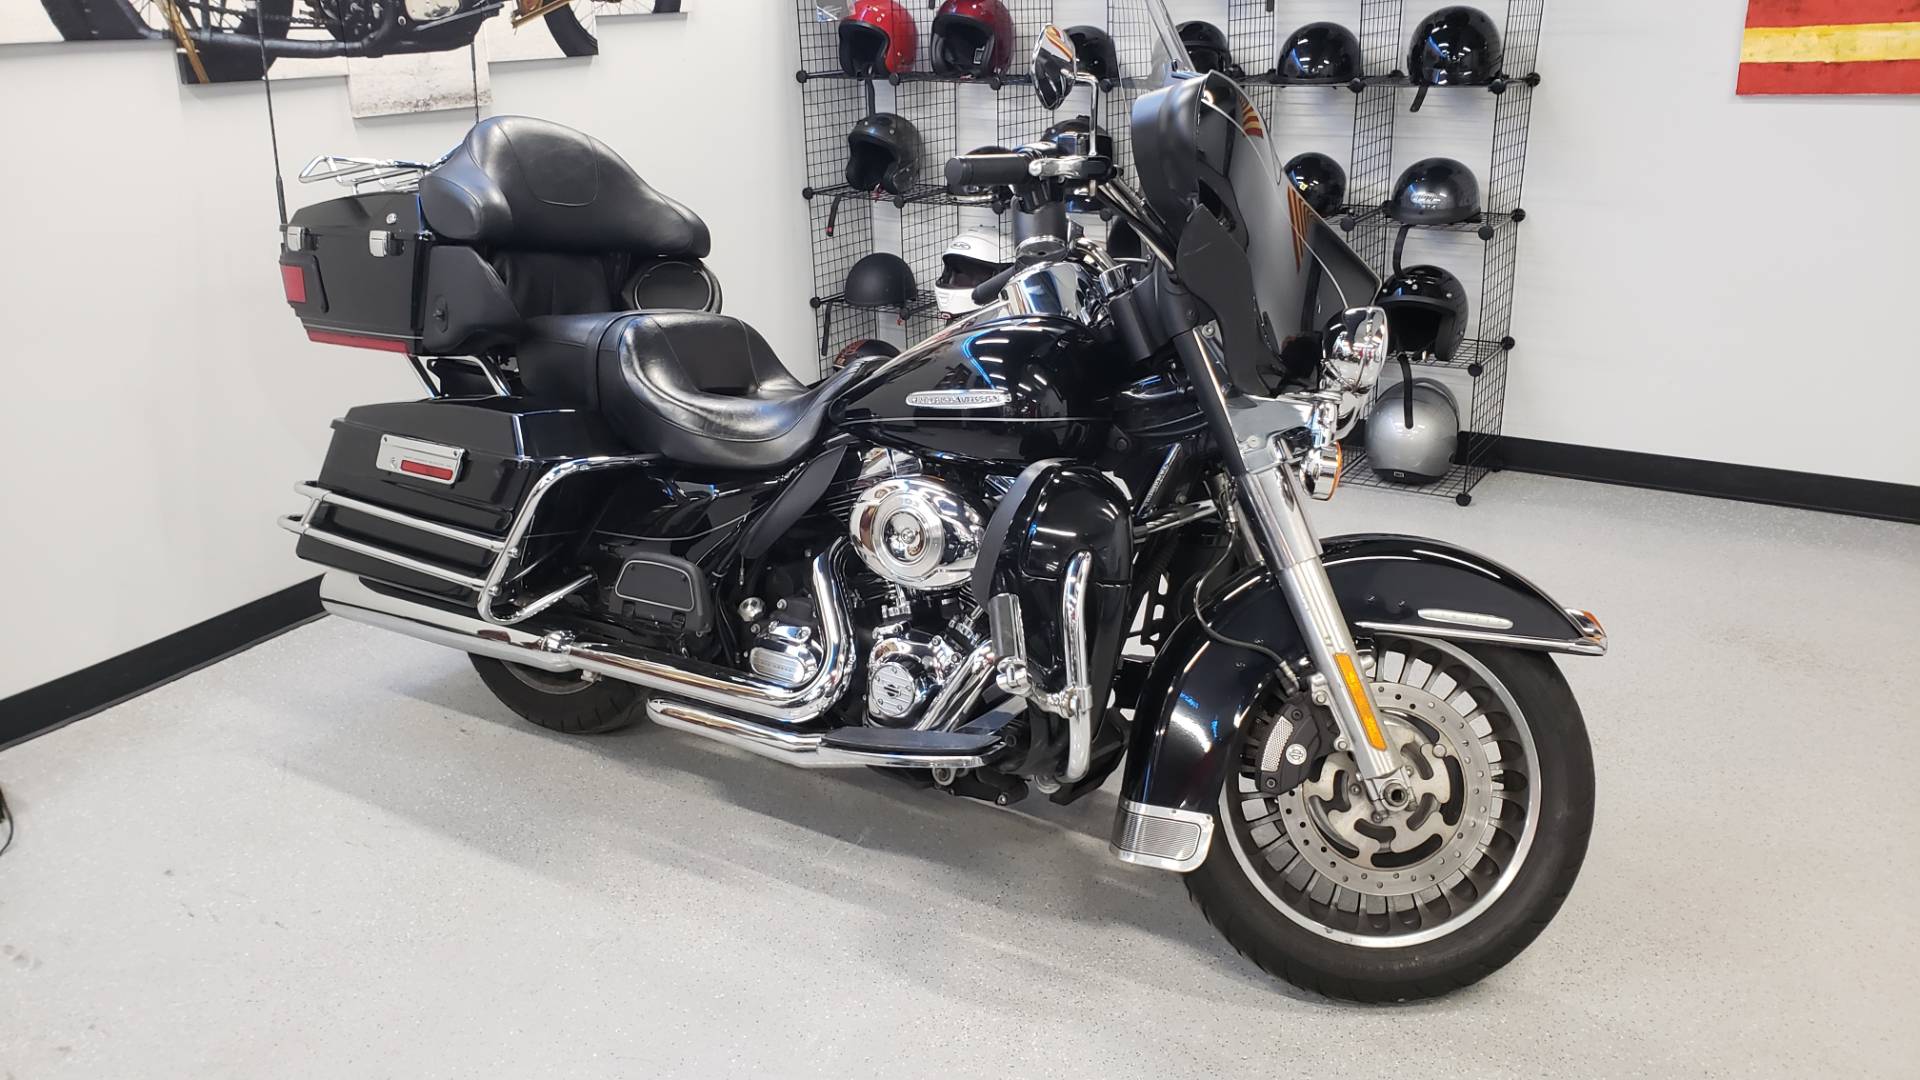 Used 2011 Harley Davidson Electra Glide Ultra Limited Motorcycles In Fort Myers Fl Stock Number 657801